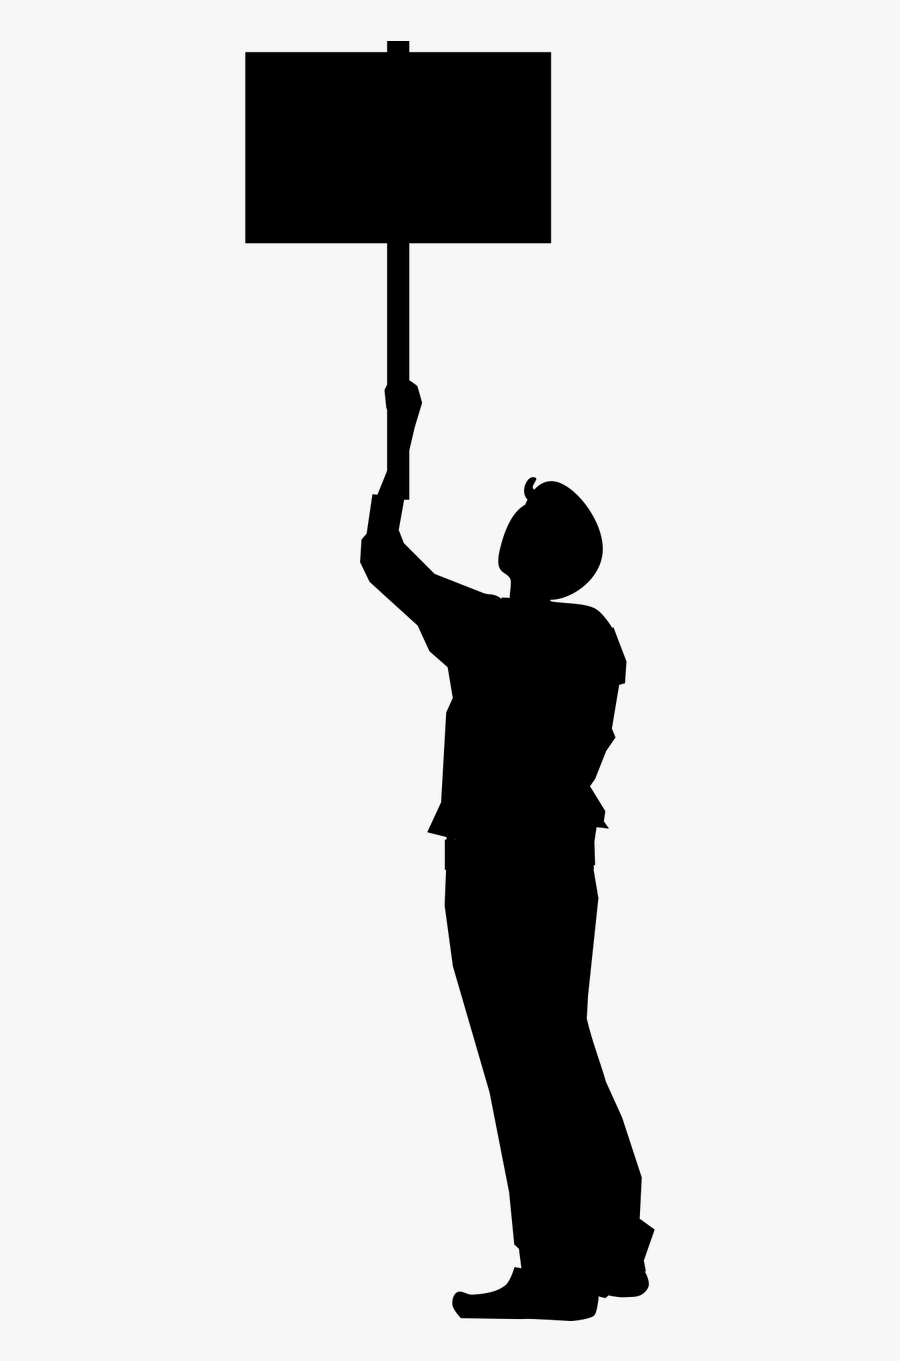 Transparent Protesters Clipart - Silhouette Protest Clipart, Transparent Clipart